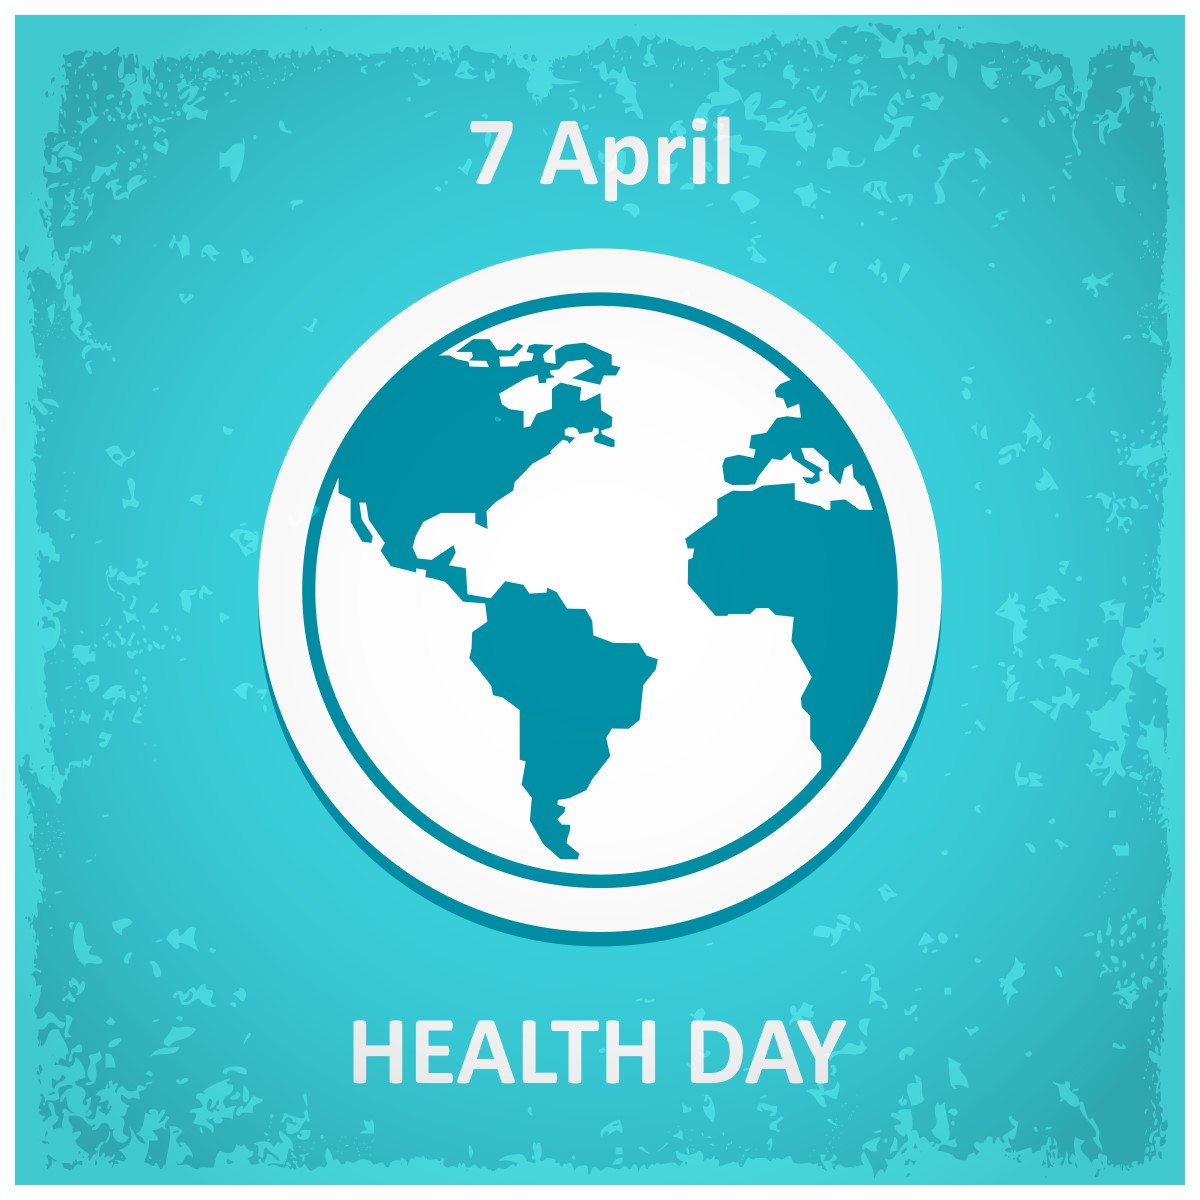 April 7th – the World Health Day